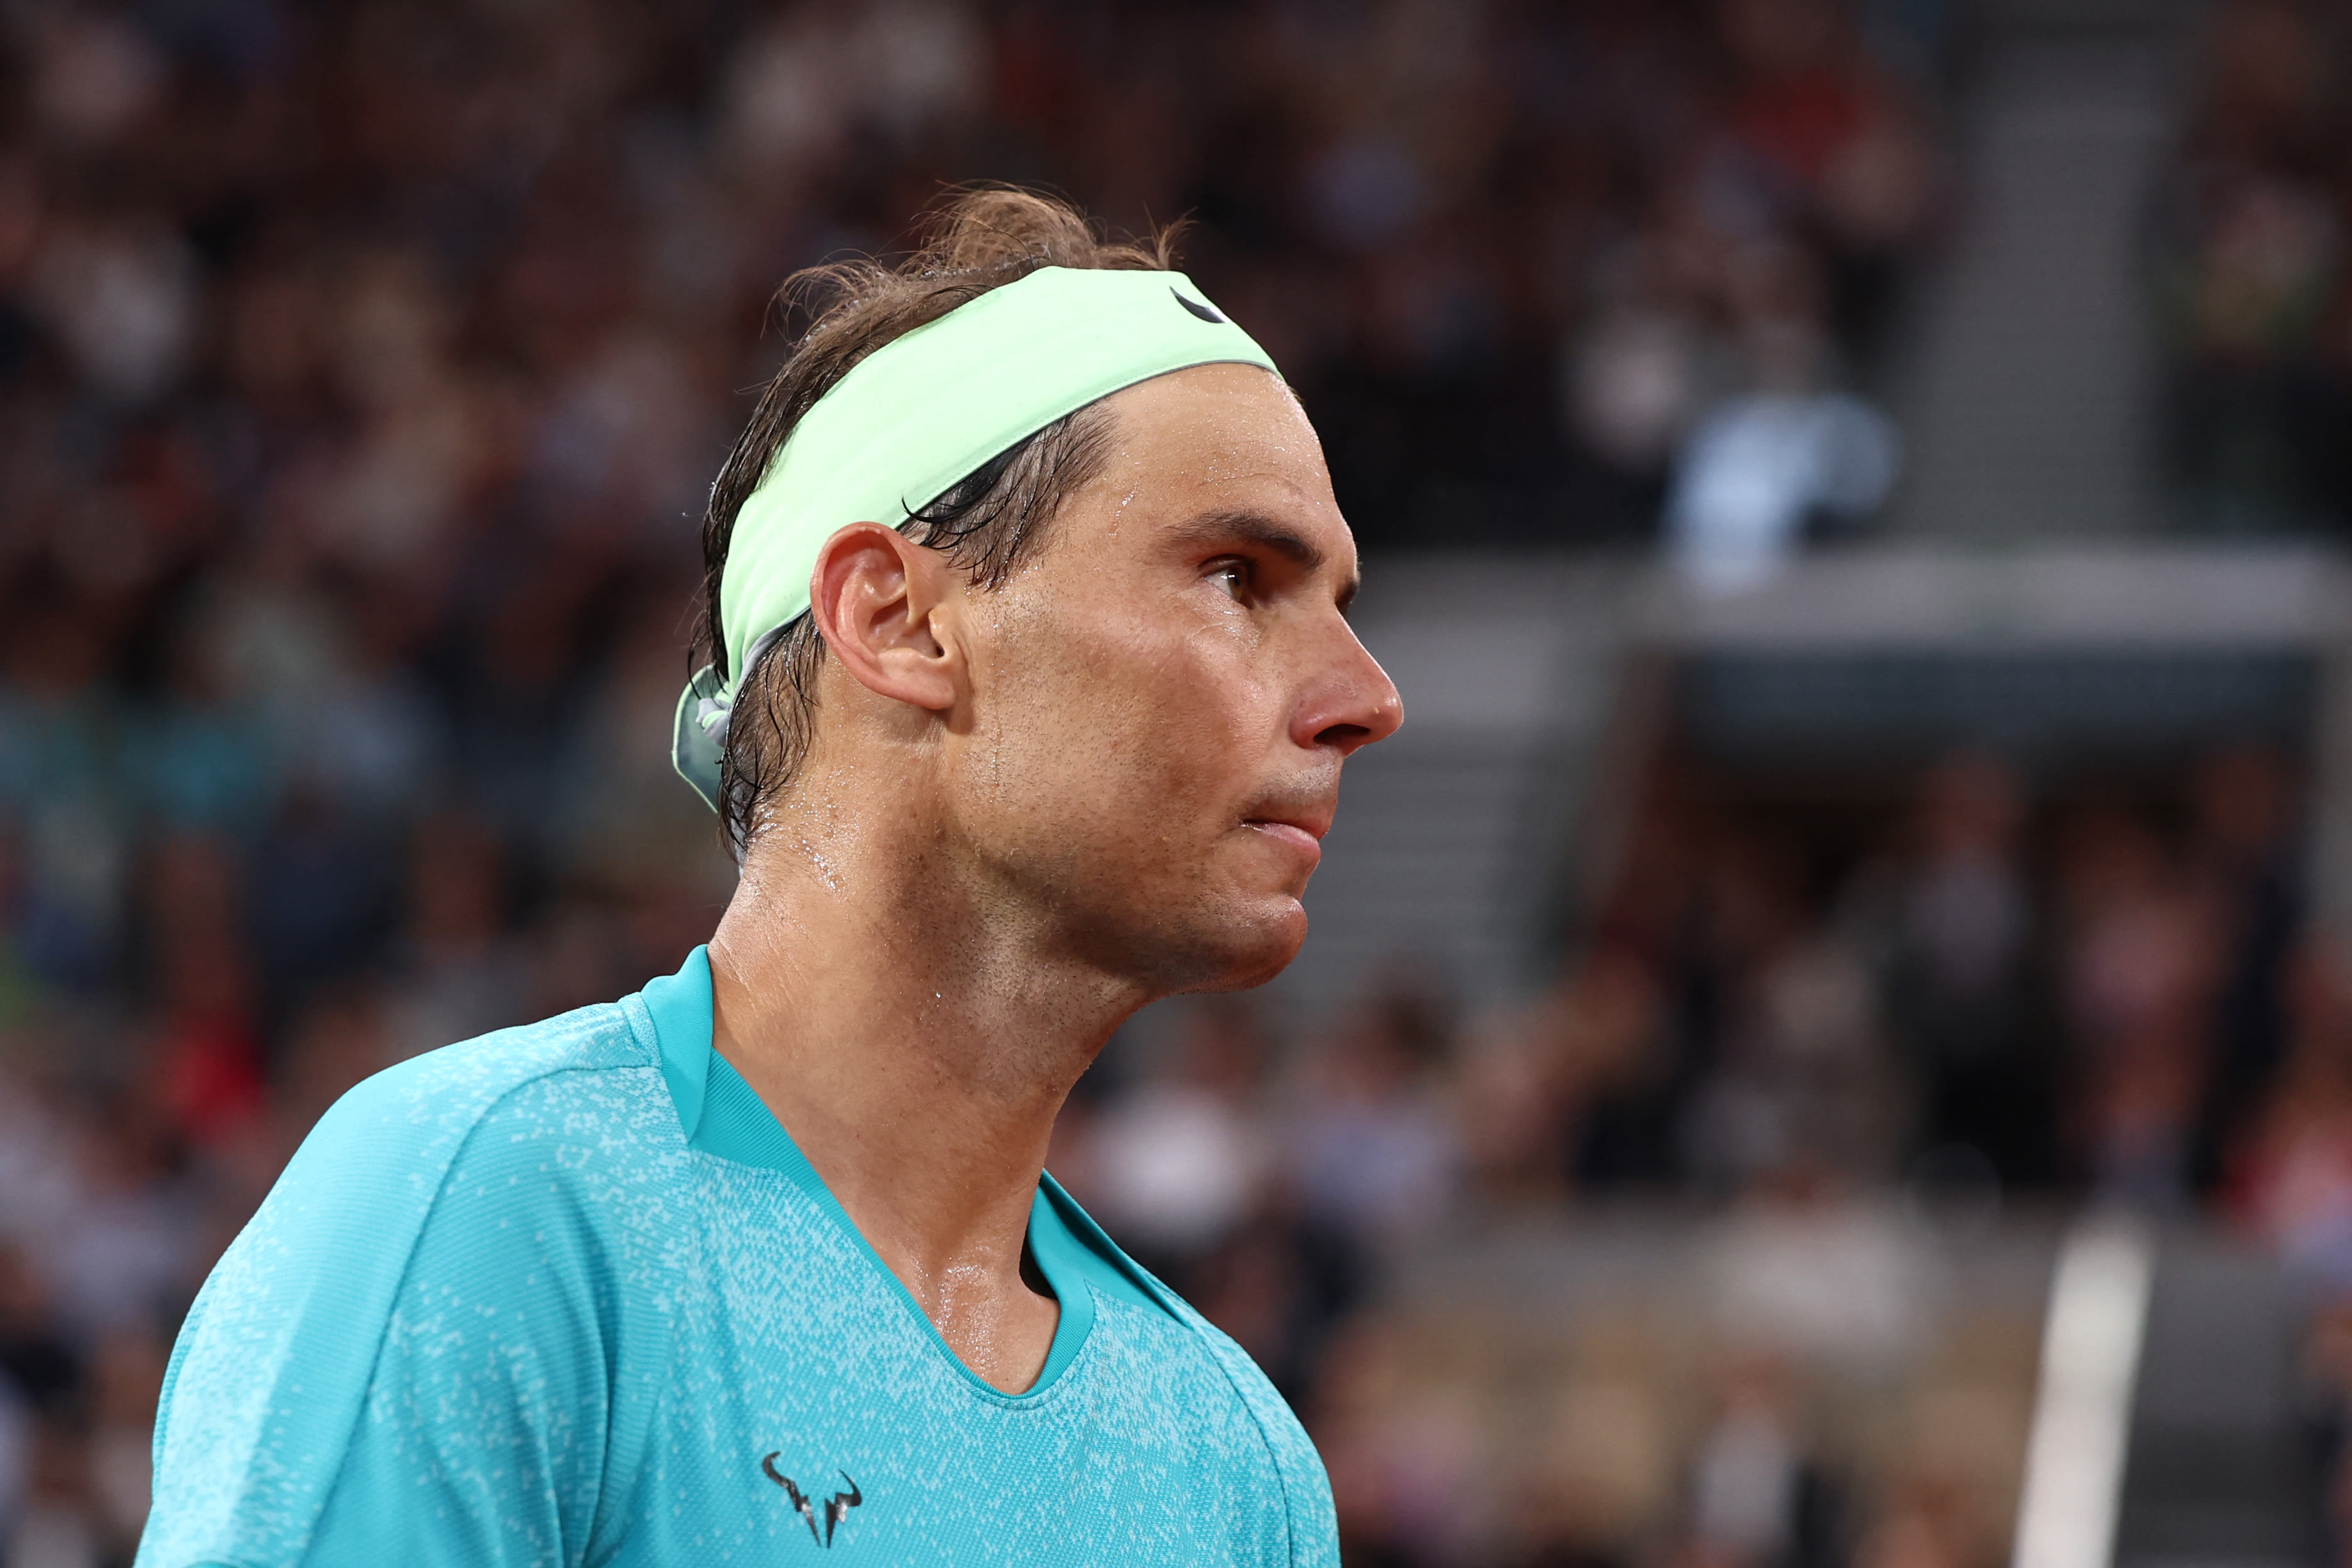 French Open: Rafael Nadal loses in straight sets 6-4, 7-6, 6-3 to Alexander Zverev in first round